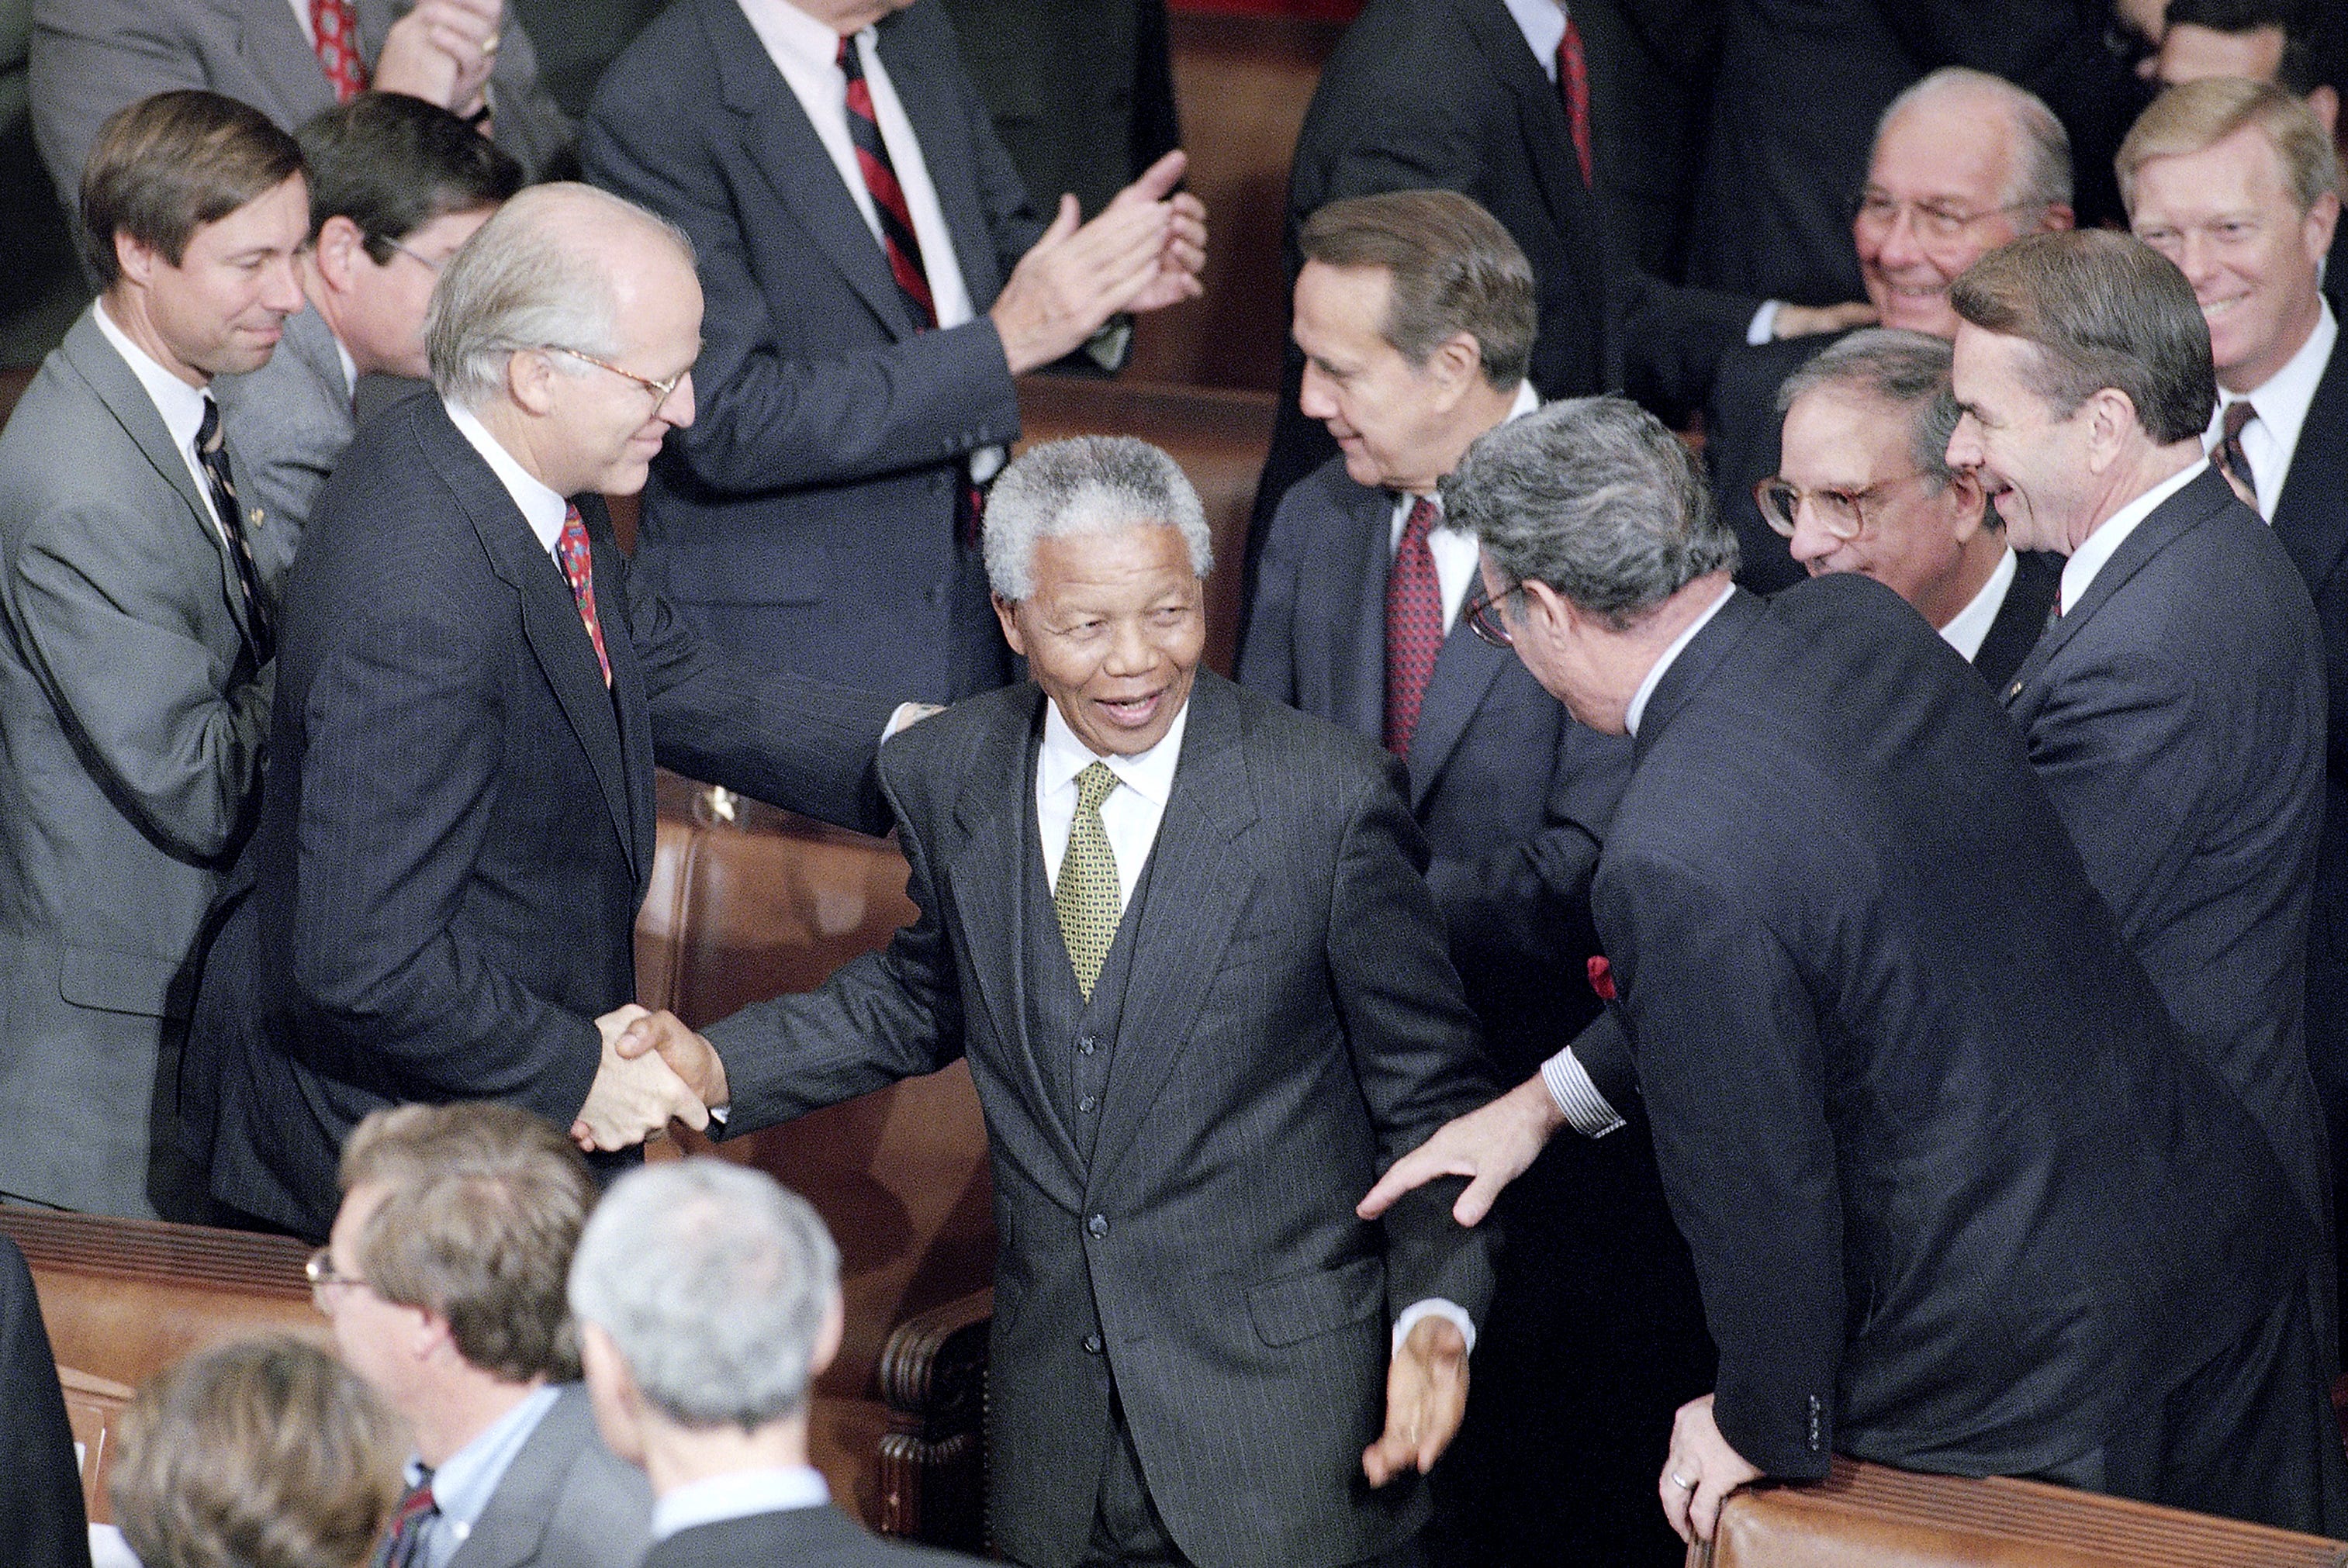 South African President Nelson Mandela is greeted by members of Congress prior to his address to a joint meeting of Congress on Thursday, Oct. 6, 1994 on Capitol Hill. From left are Rep. Christopher Shays, R-Conn.; Mandela; Senate Minority Leader Bob Dole of Kansas; Rep. Peter King, R-N.Y.; Senate Majority Leader George Mitchell of Maine; House Minority Leader Bob Michel of Illinois; Rep. Dale Kildee, D-Flint; and House Majority Leader Richard Gephardt of Missouri.